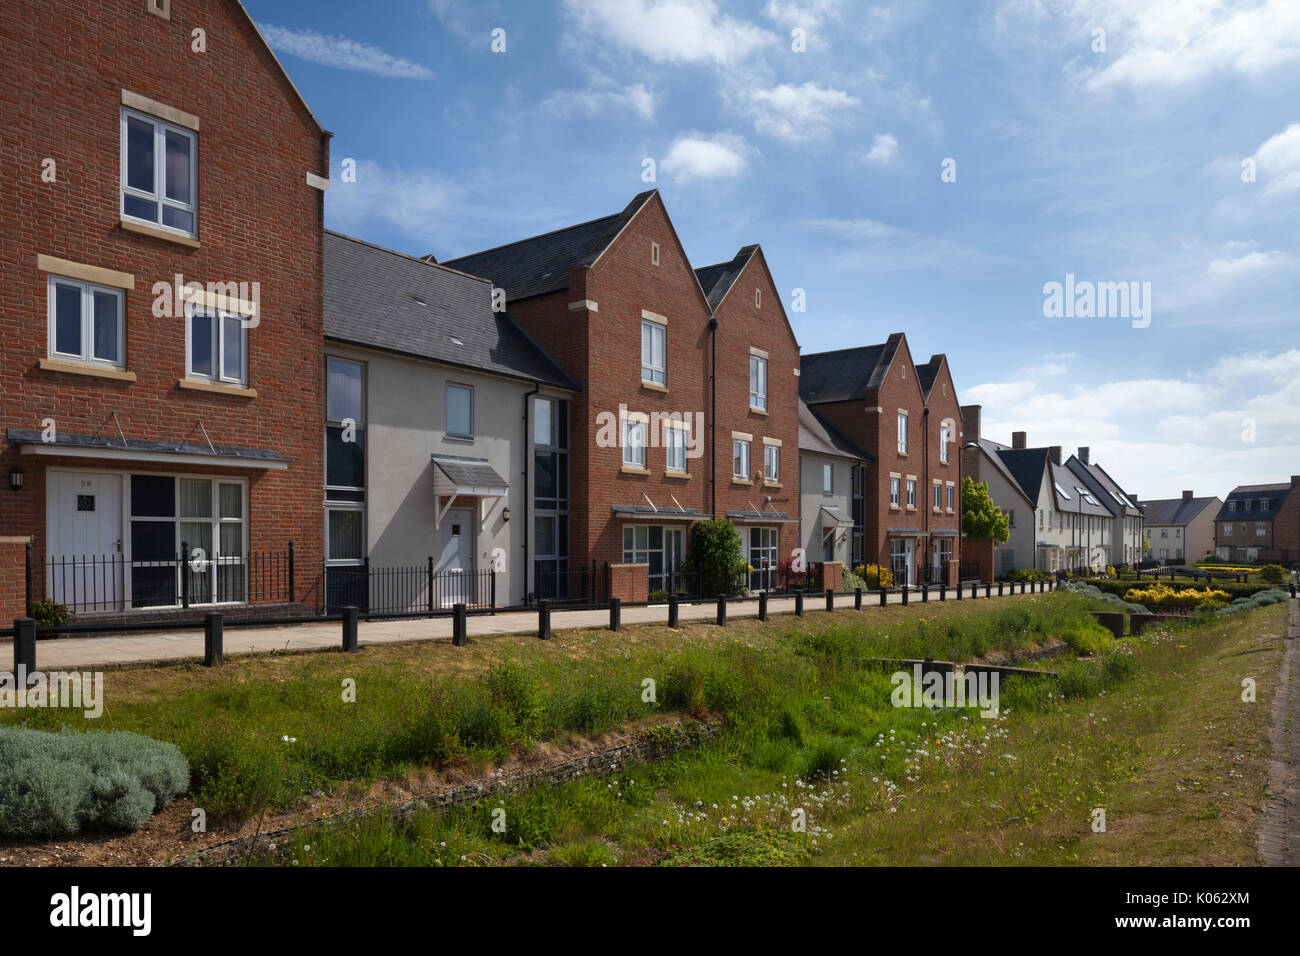 Part of the mixed housing styles to be found within the contemporary eco-design development at Upton in Northampton, England. Stock Photo